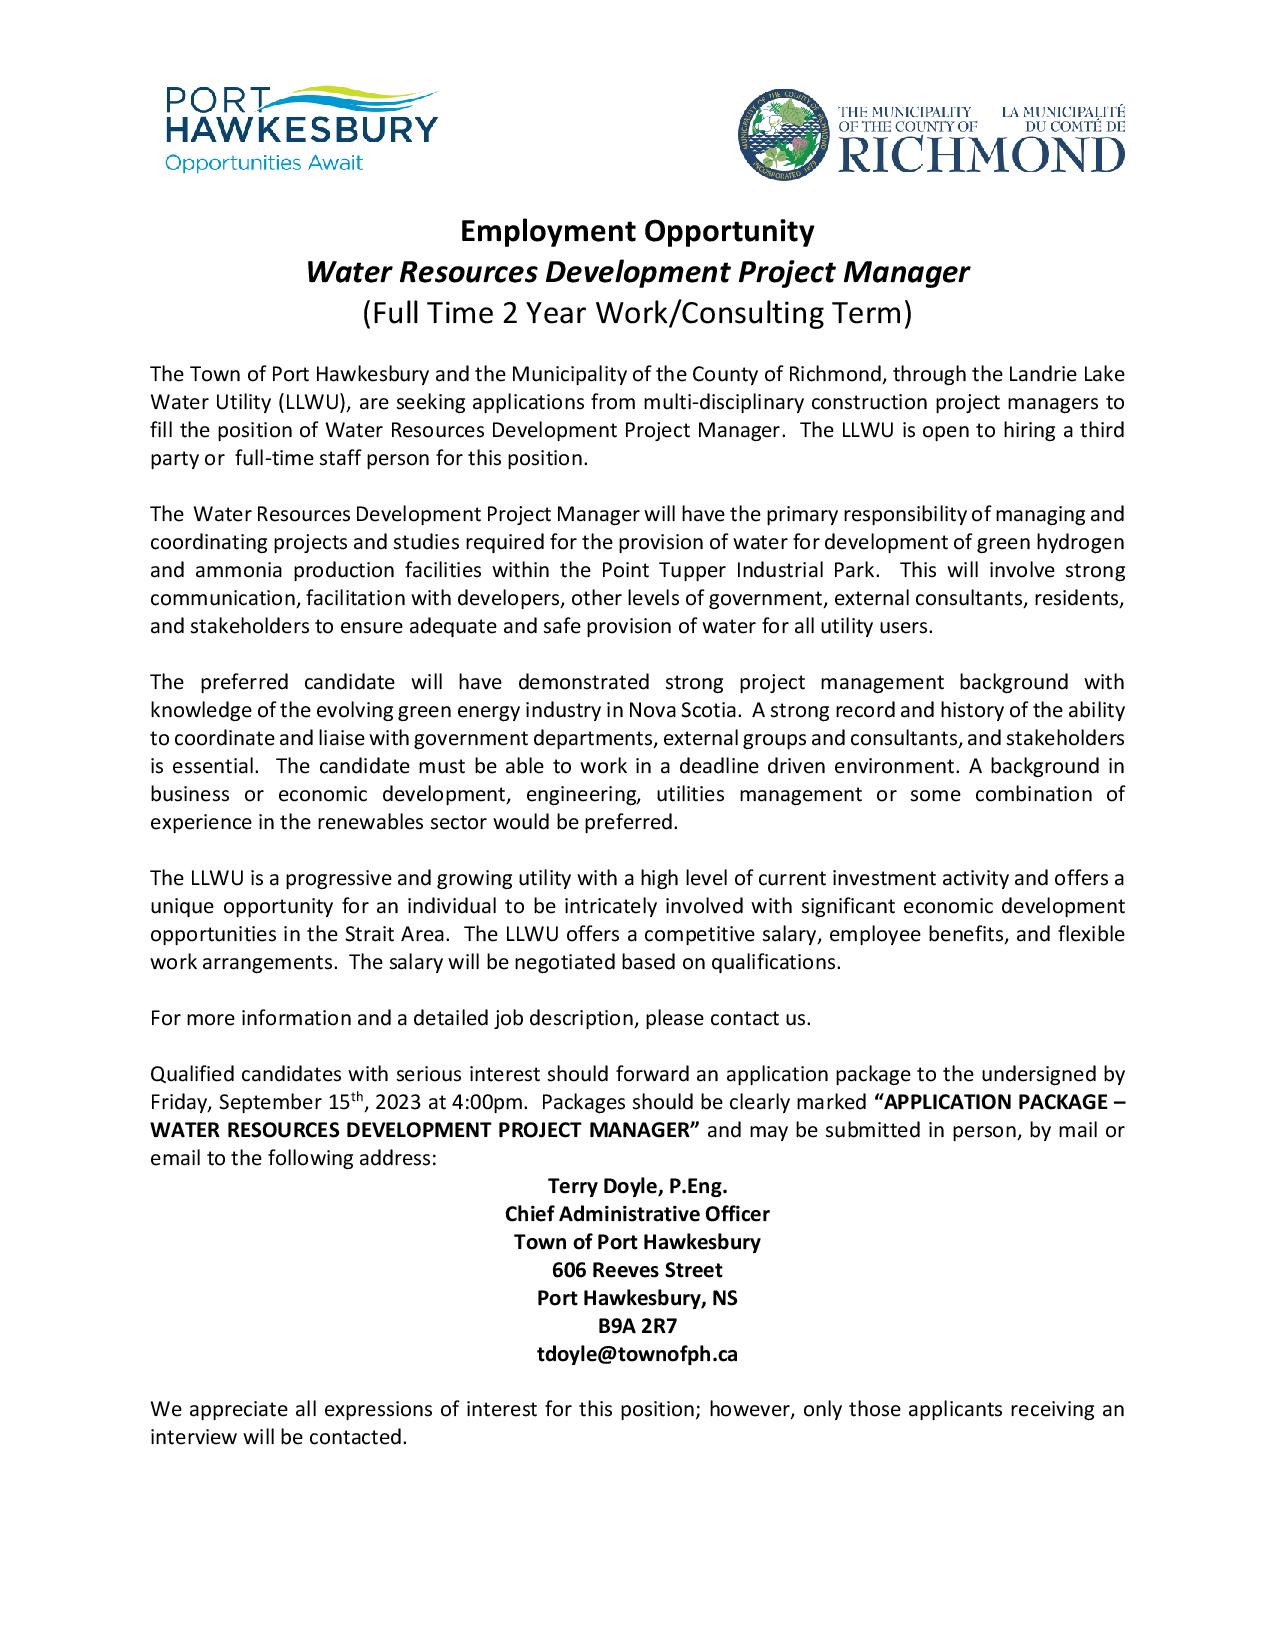 Employment Opportunity – Water Resources Development Project Manager